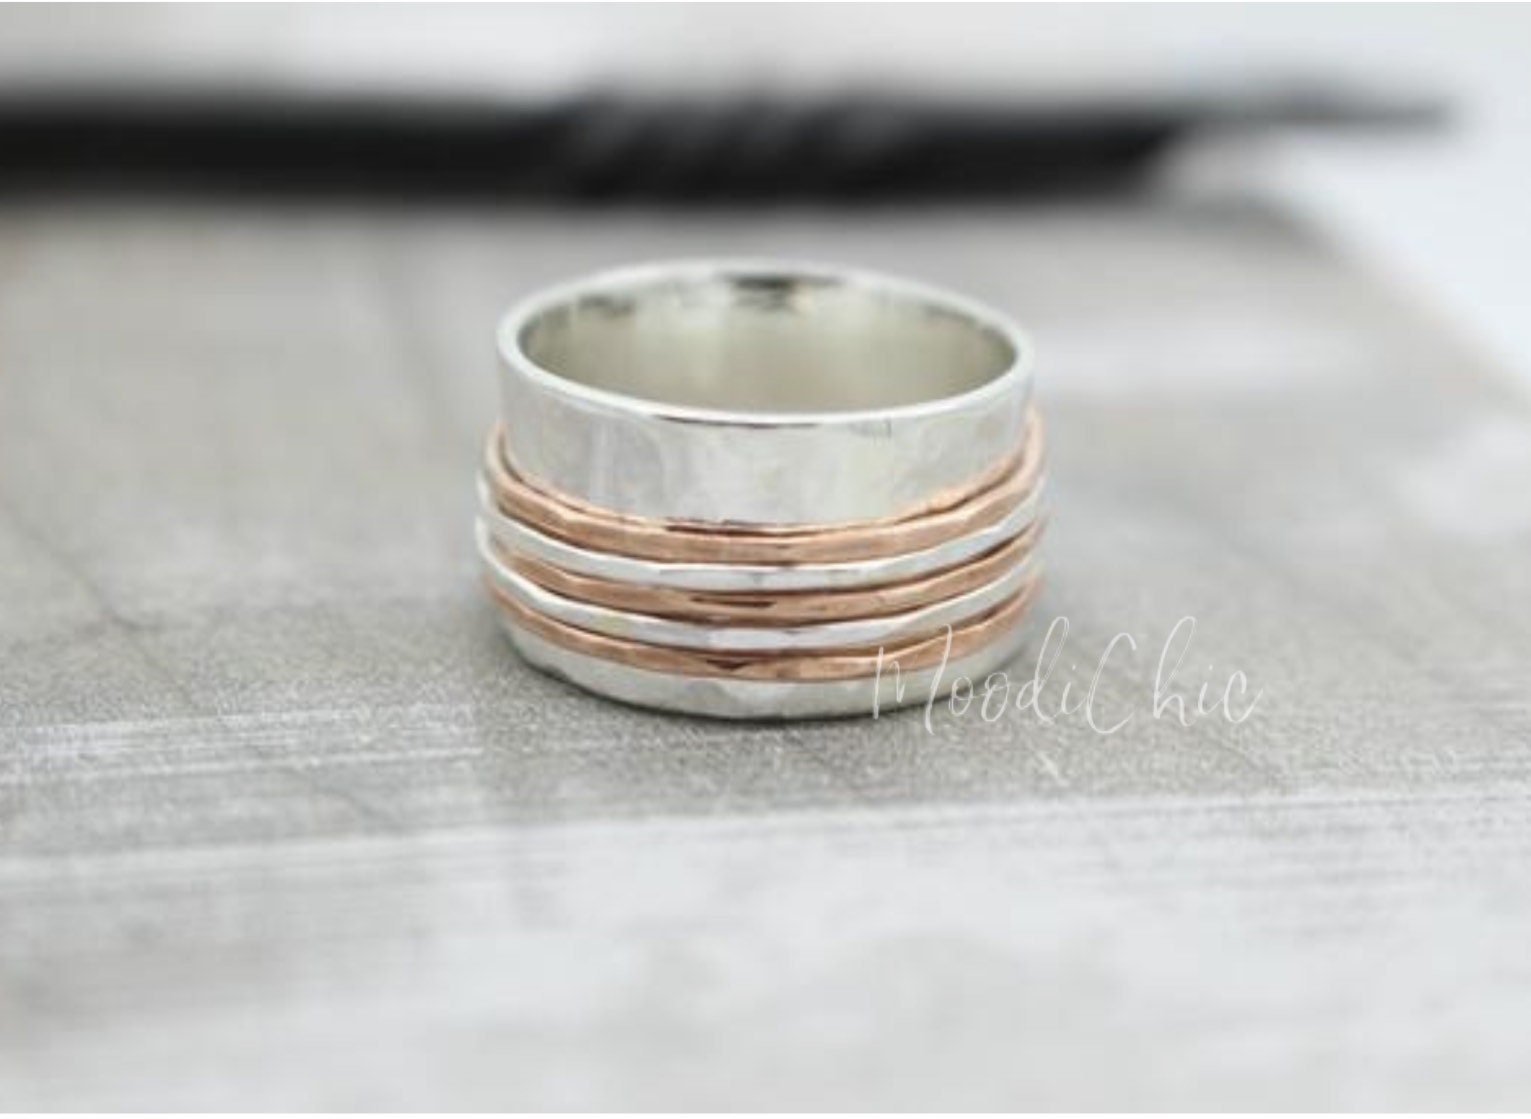 Copper and Sterling silver Spinner Ring